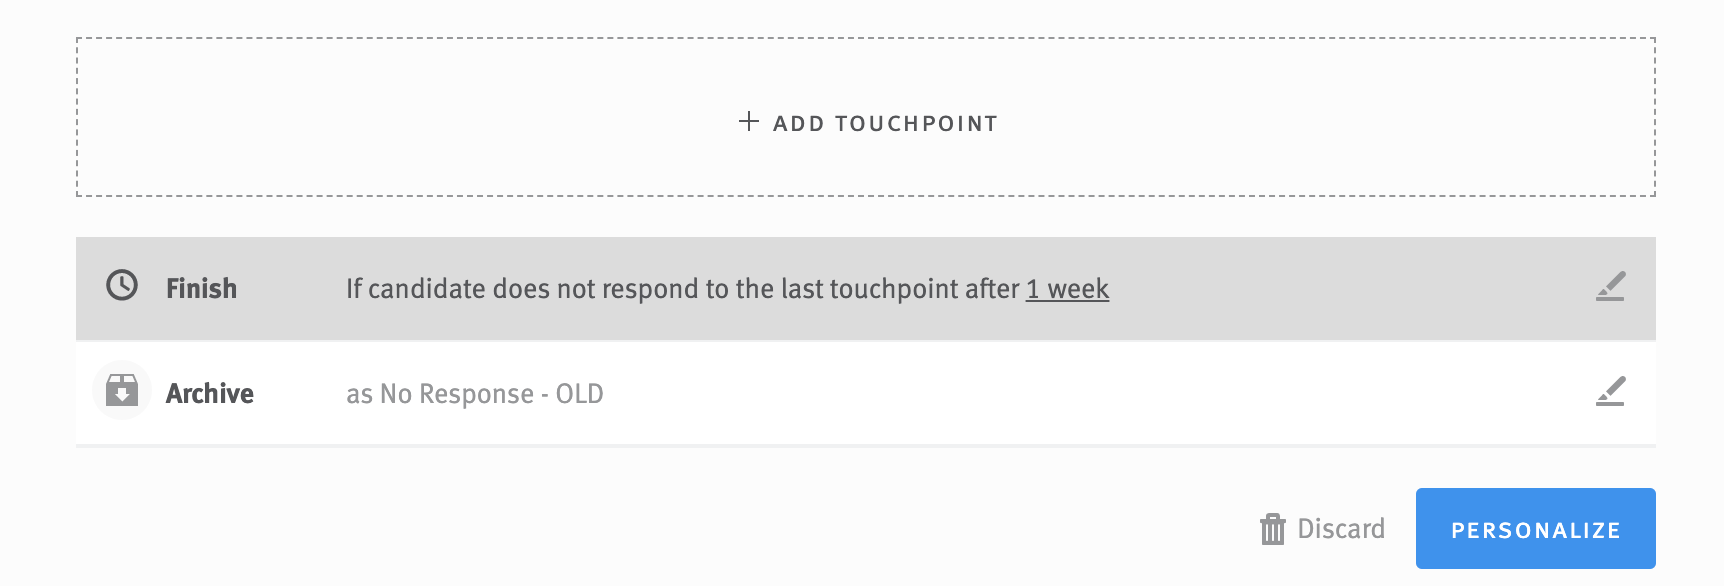 Add touchpoint, finish, and archive action fields at the bottom of the campaign editor.